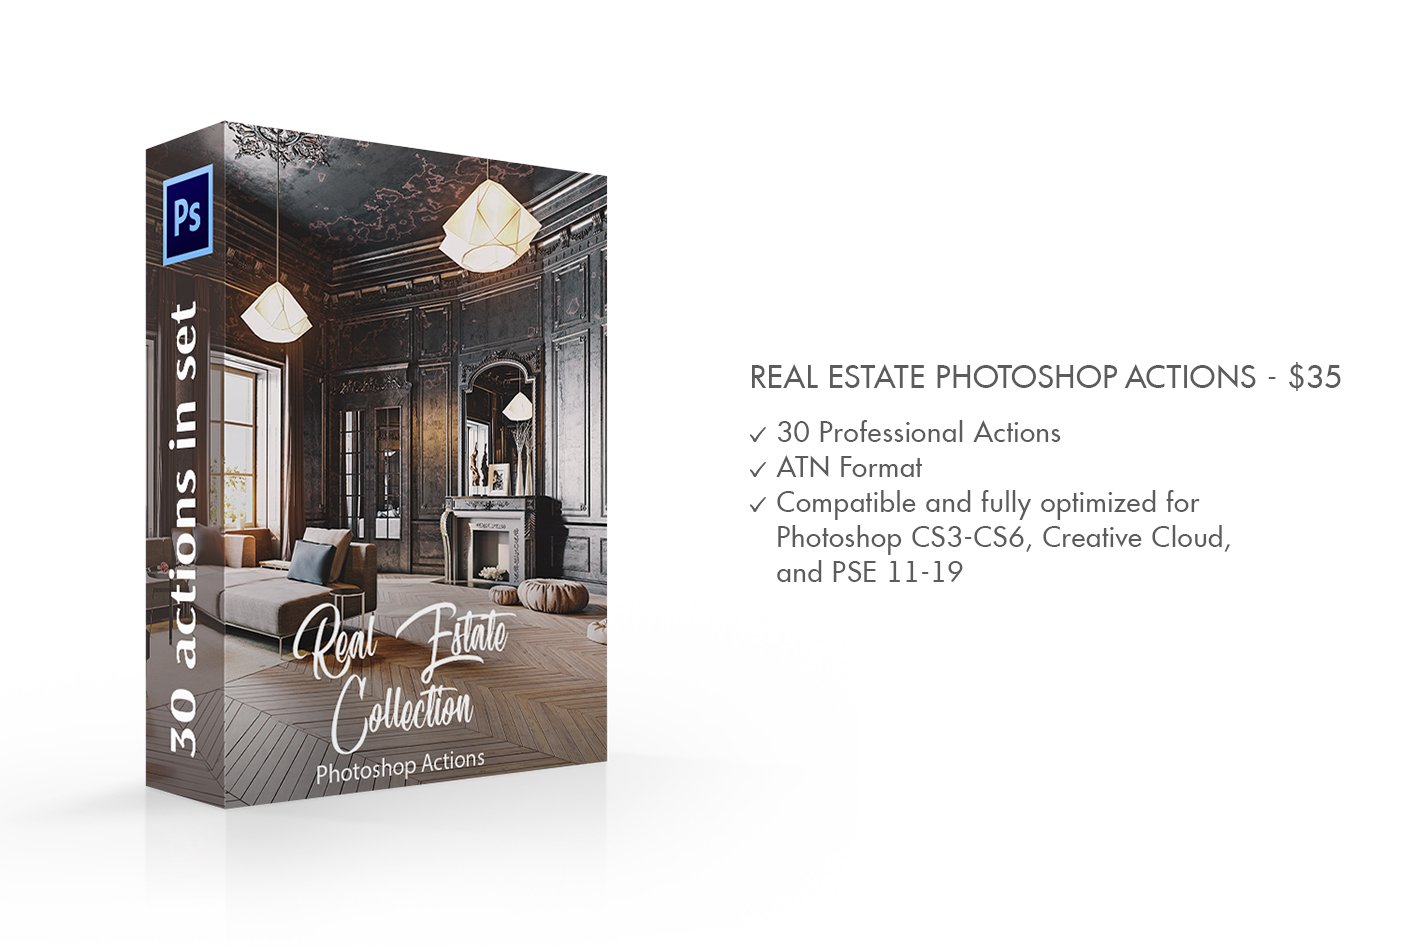 Real Estate Photoshop Actionspreview image.